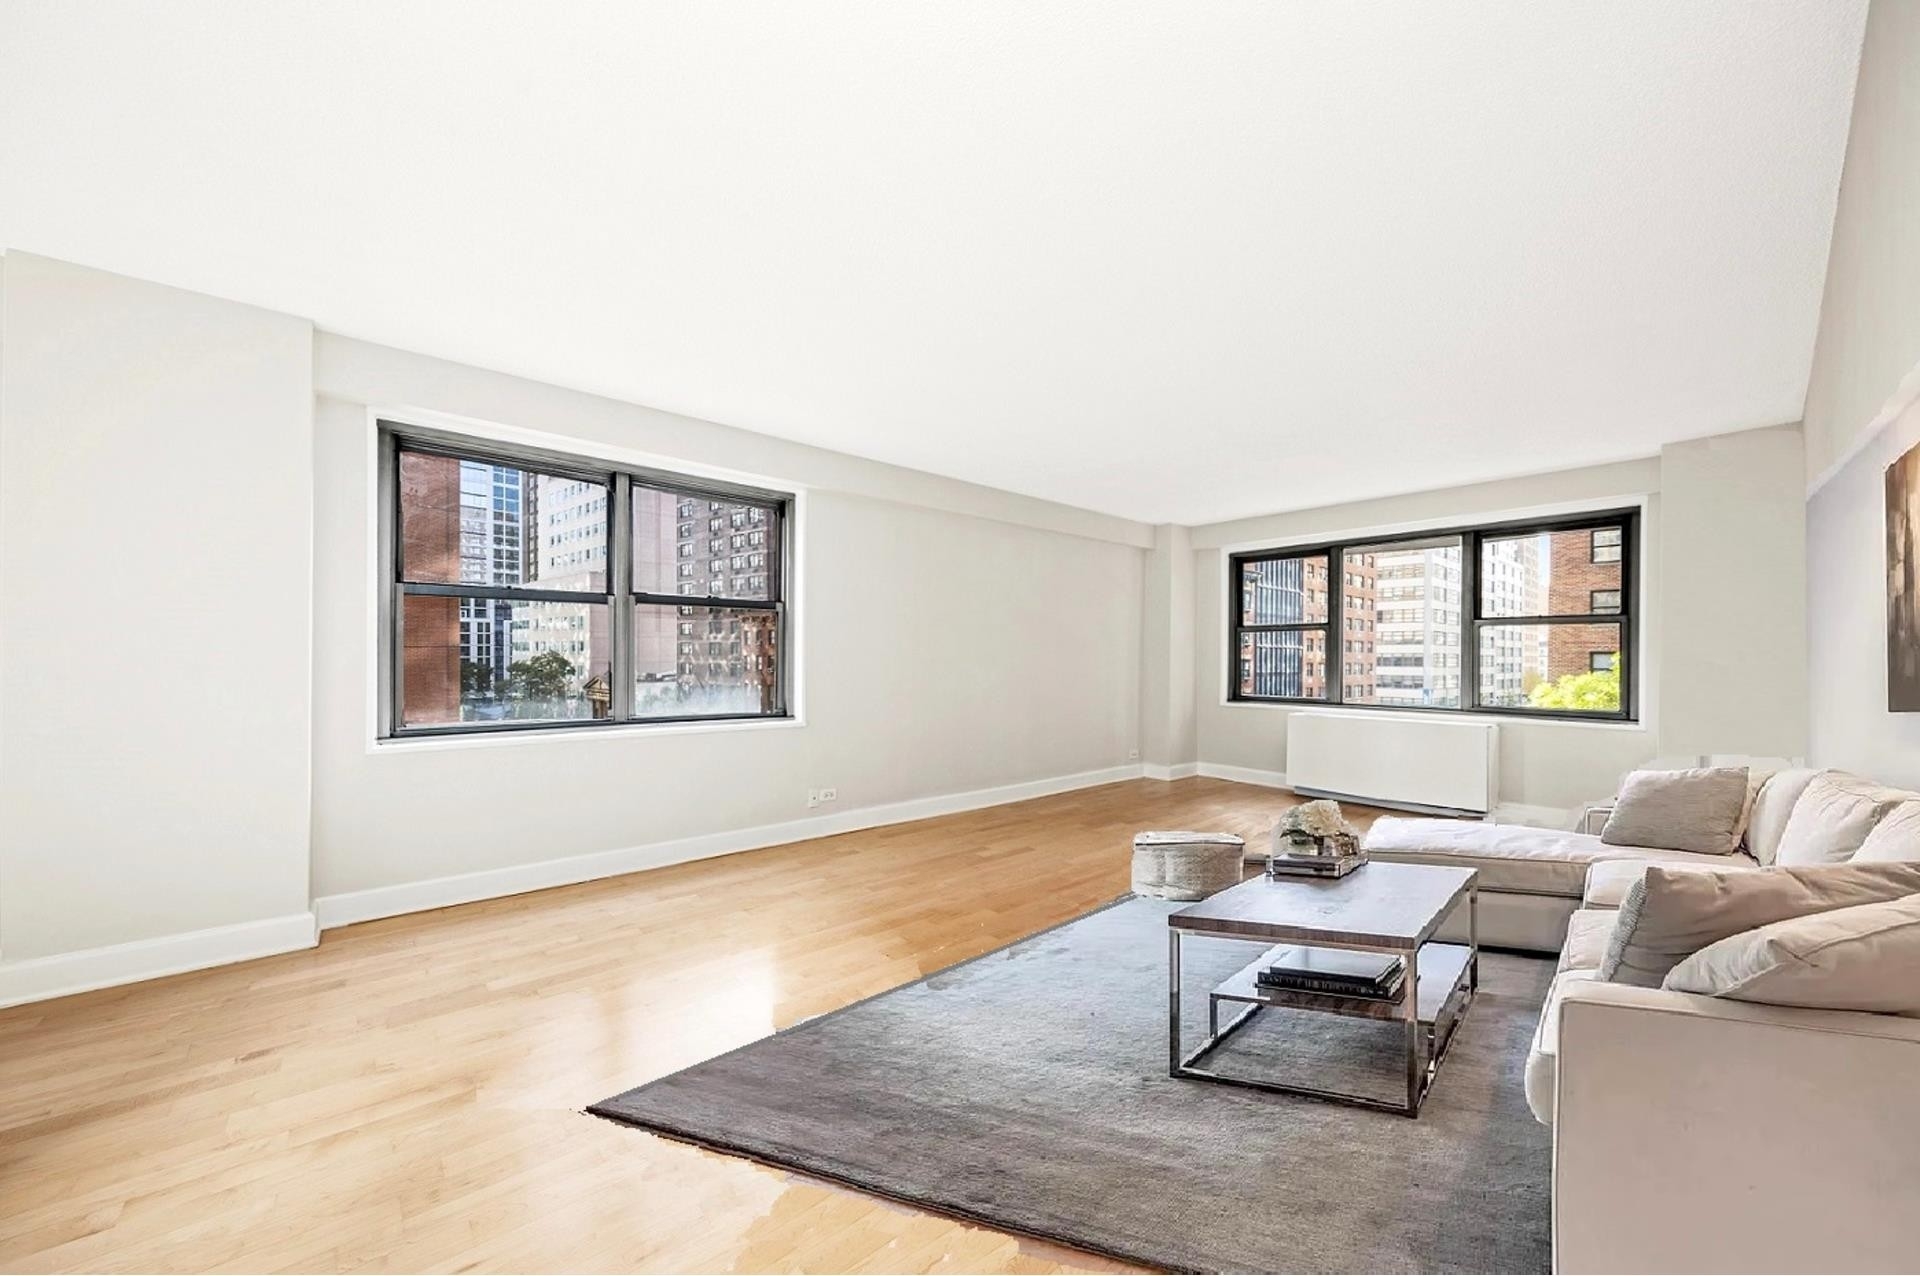 Co-op Properties for Sale at Murray Hill House, 132 E 35TH ST, 3H Murray Hill, New York, NY 10016